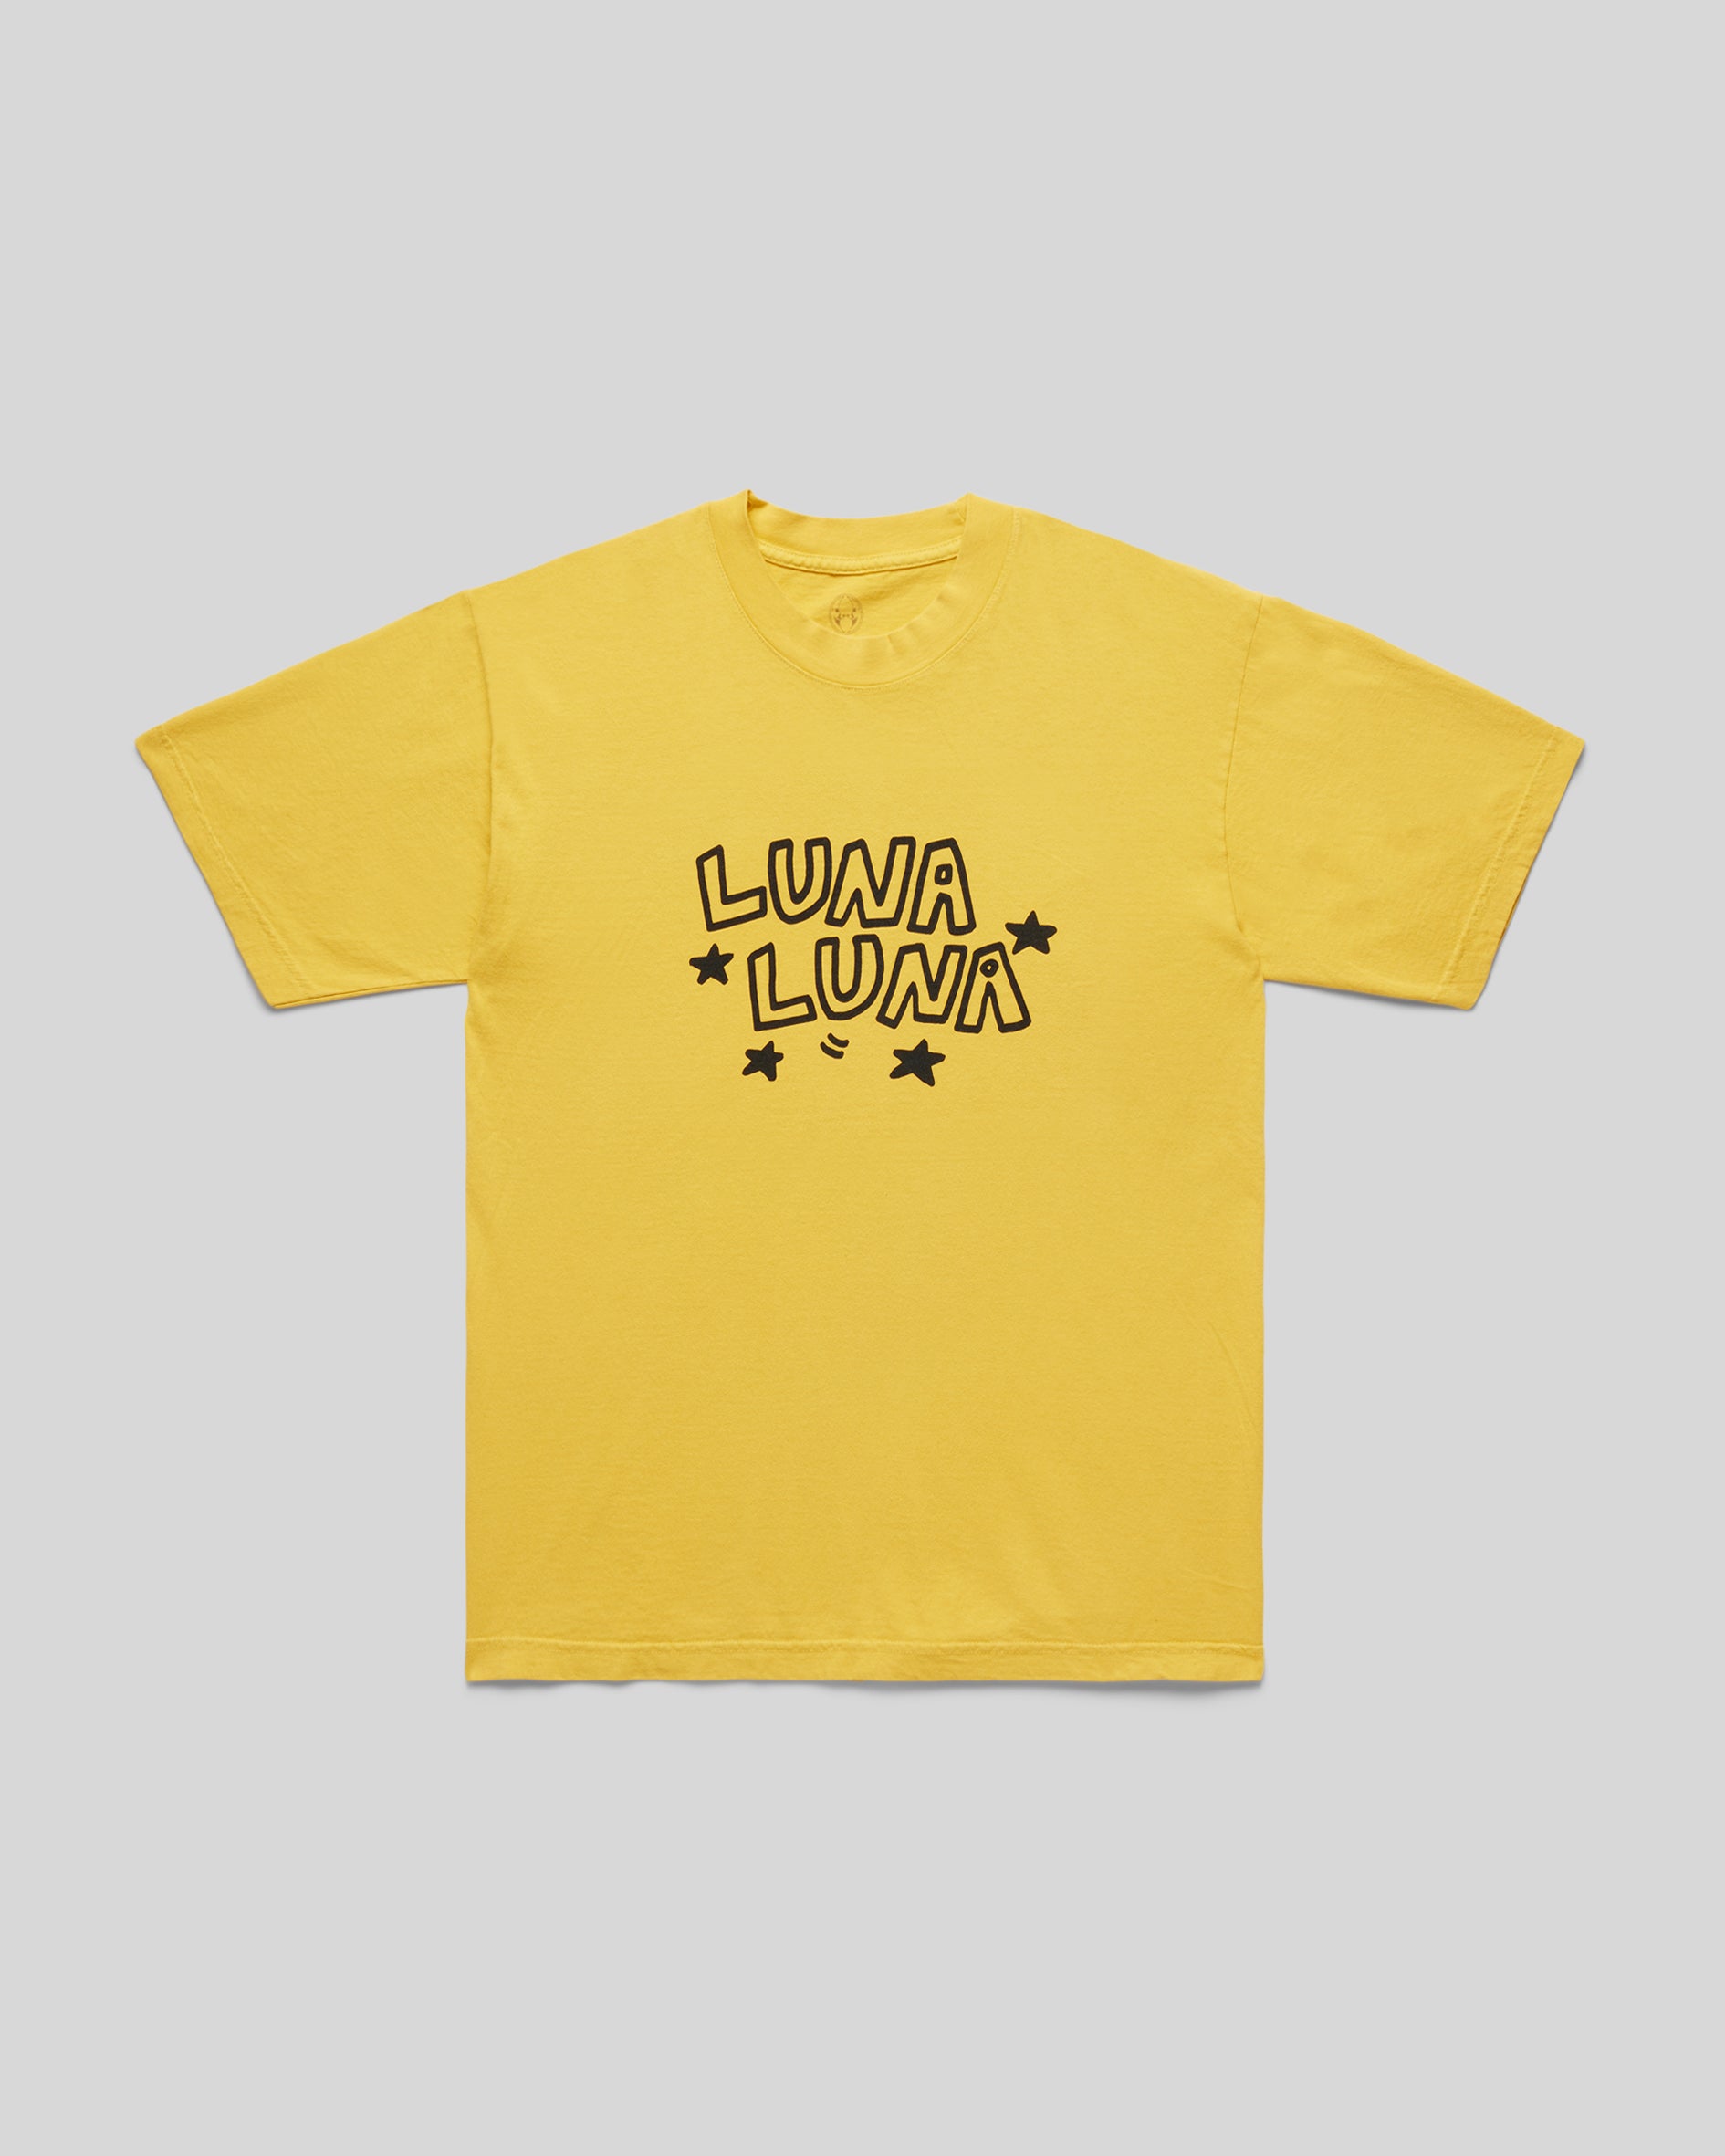 Haring Poetic Extravaganza T-Shirt Spectra Yellow